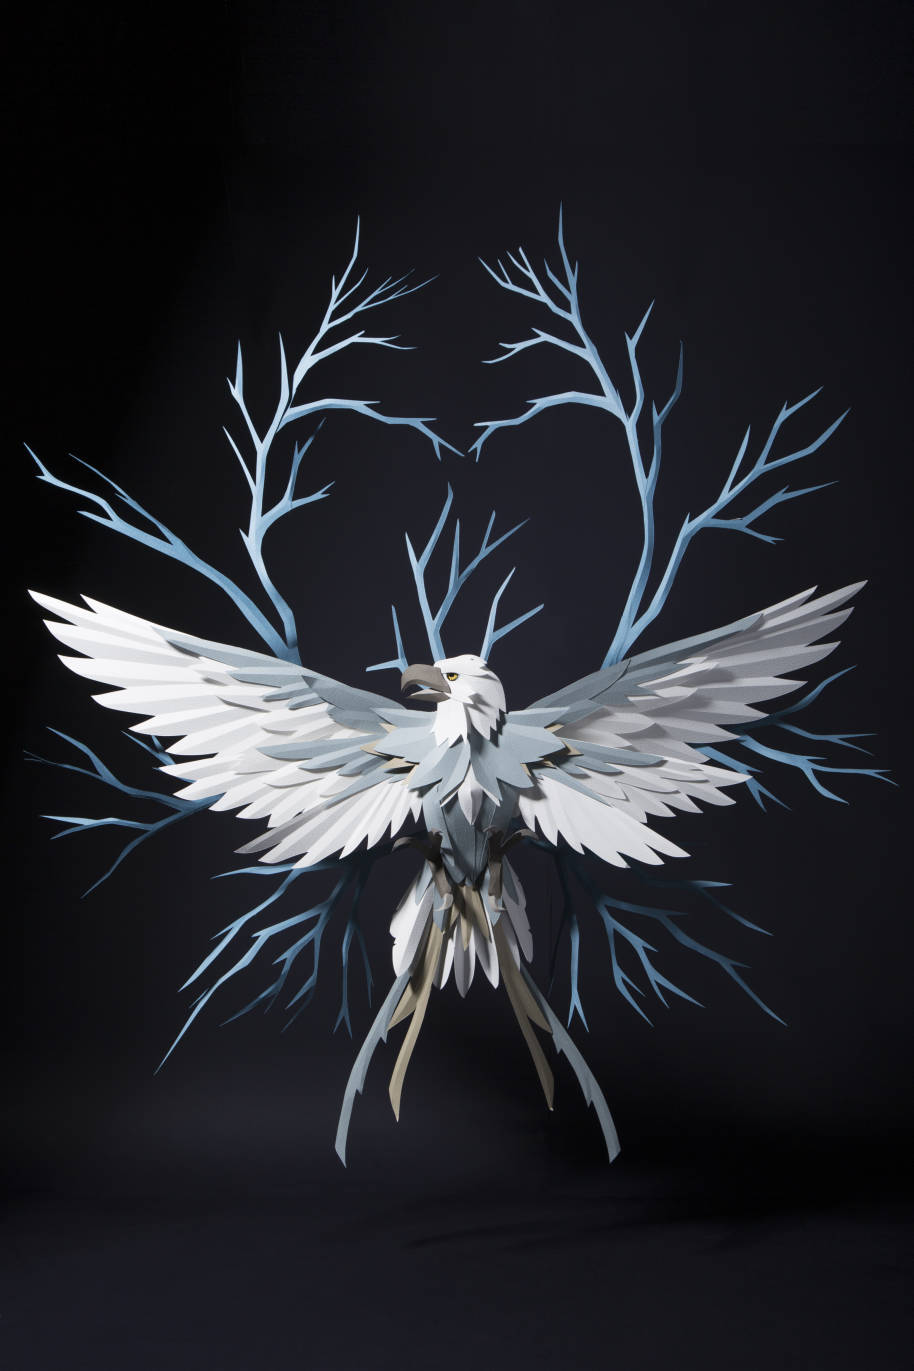 Photograph of a paper model of a Thunderbird, by artist Andy Singleton